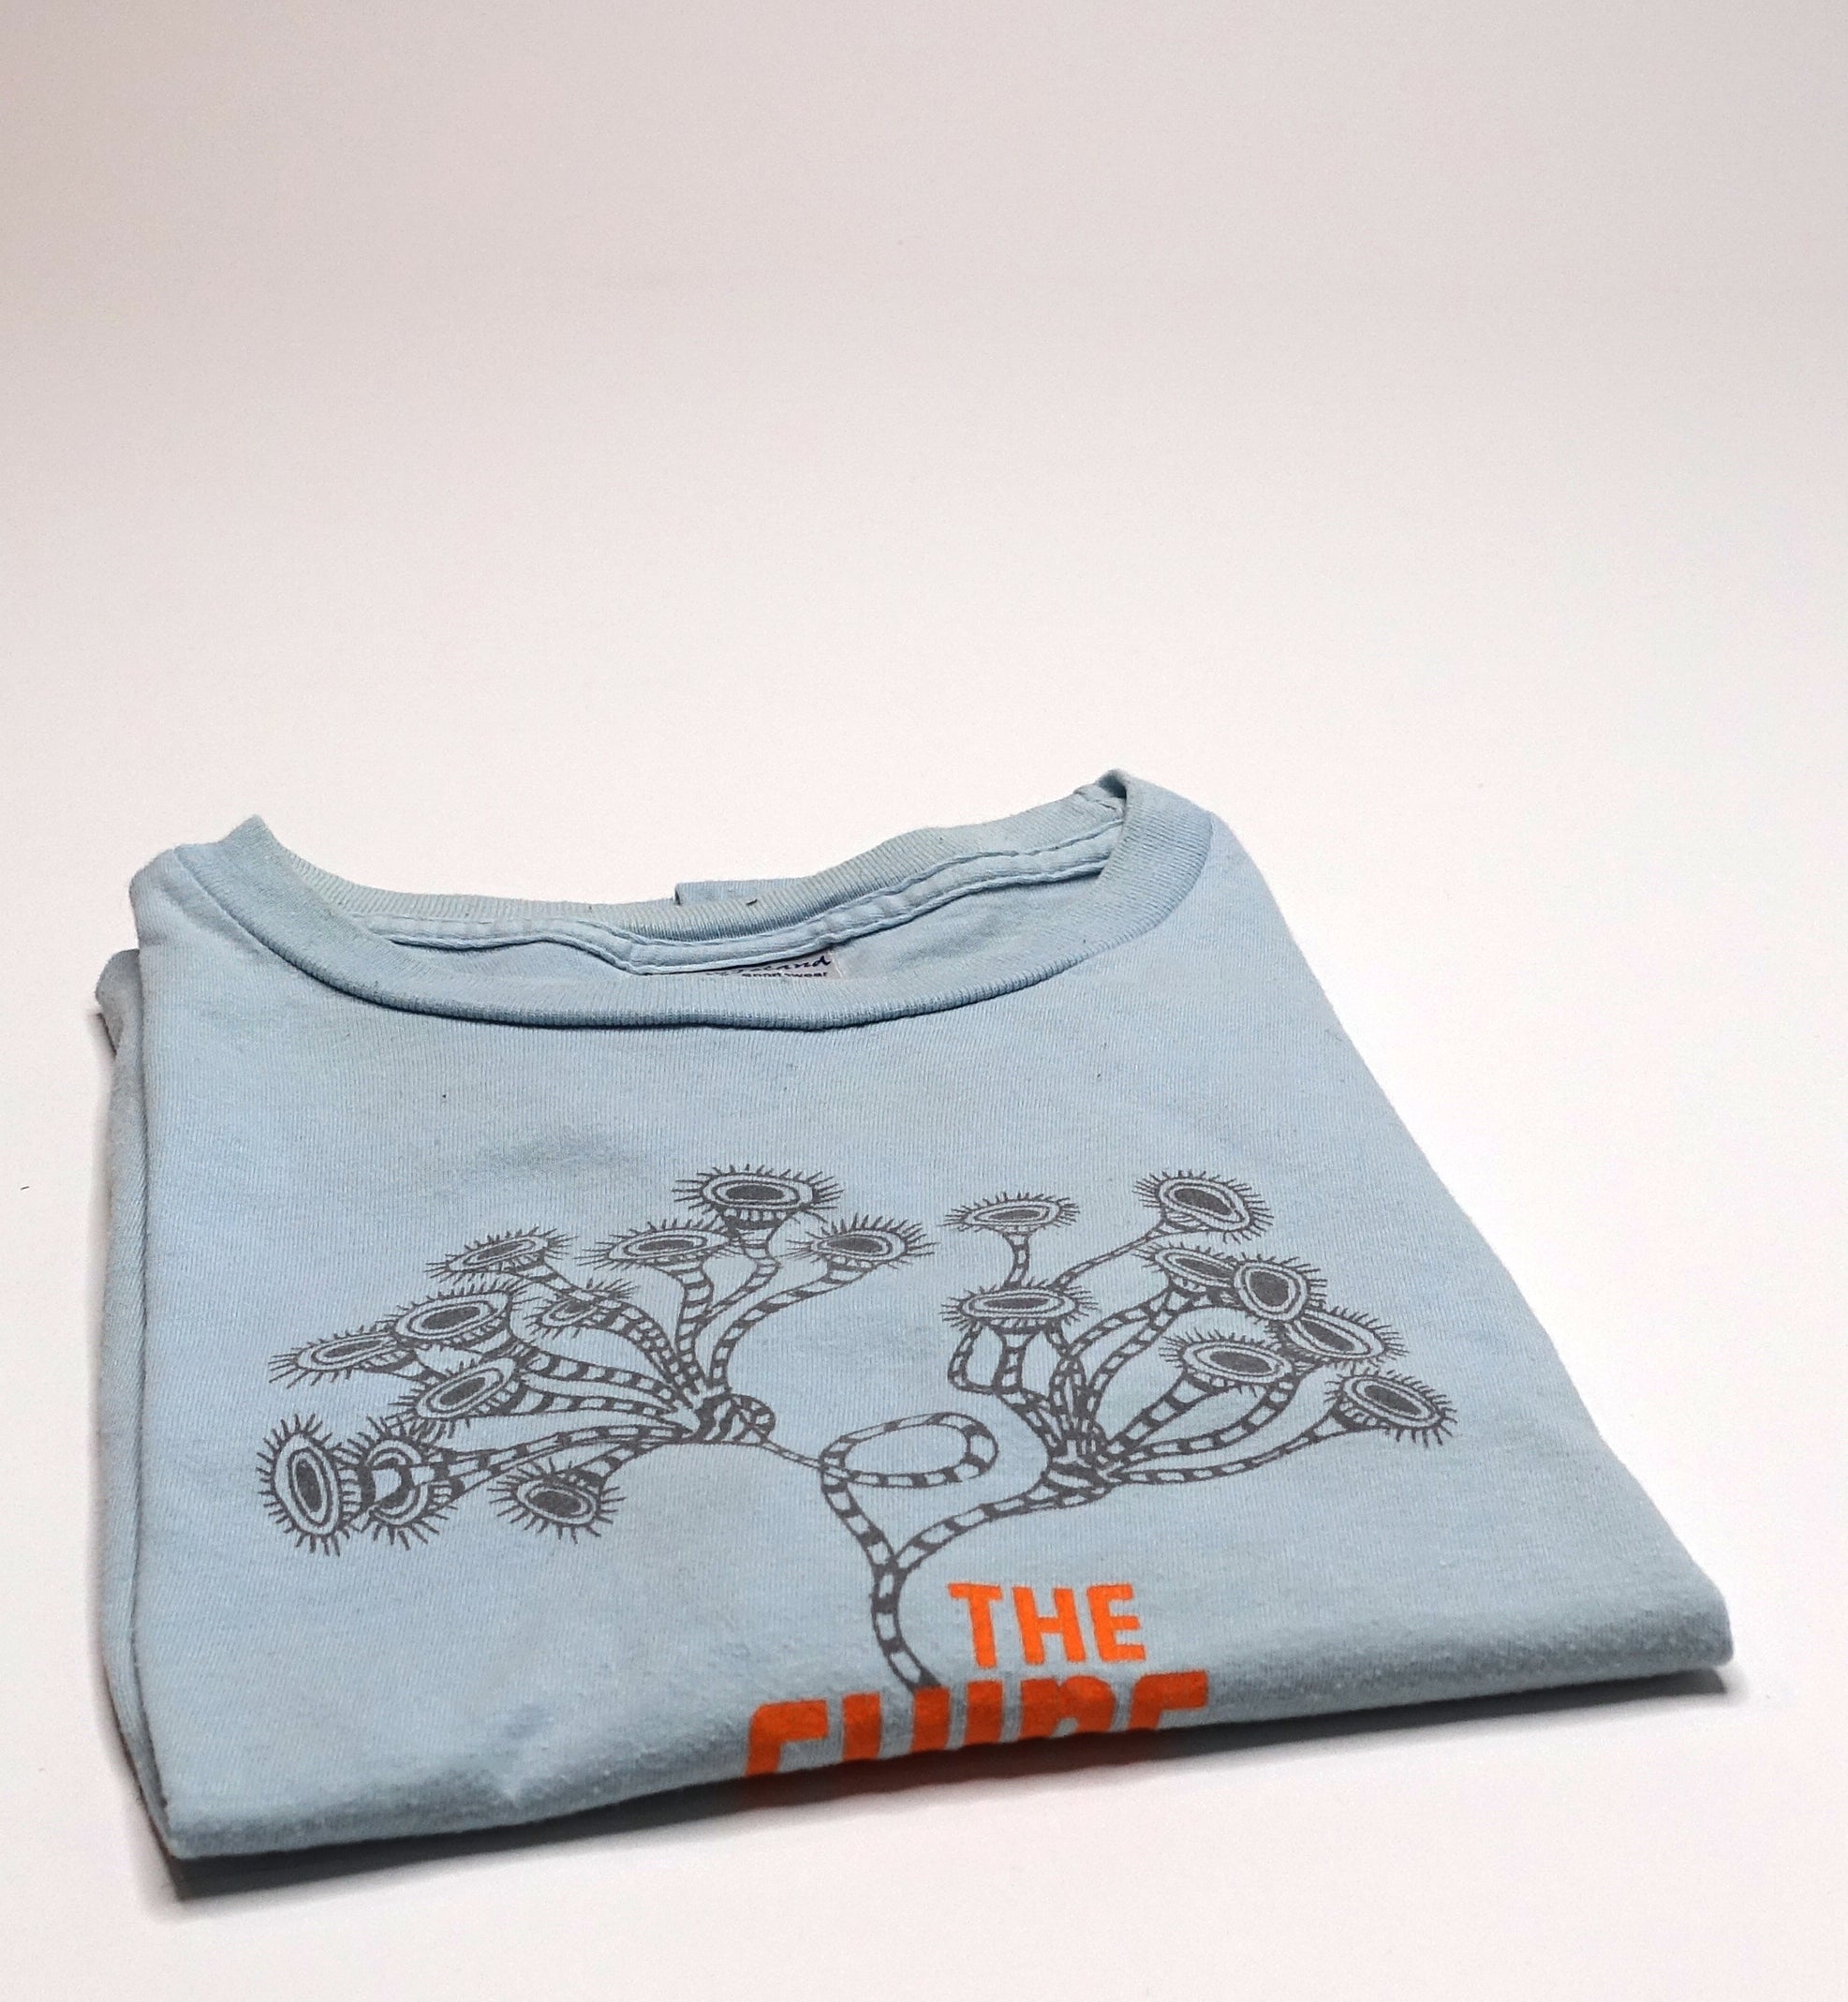 the Shins - Wincing The Night Away 2006 Tour Shirt Size Small